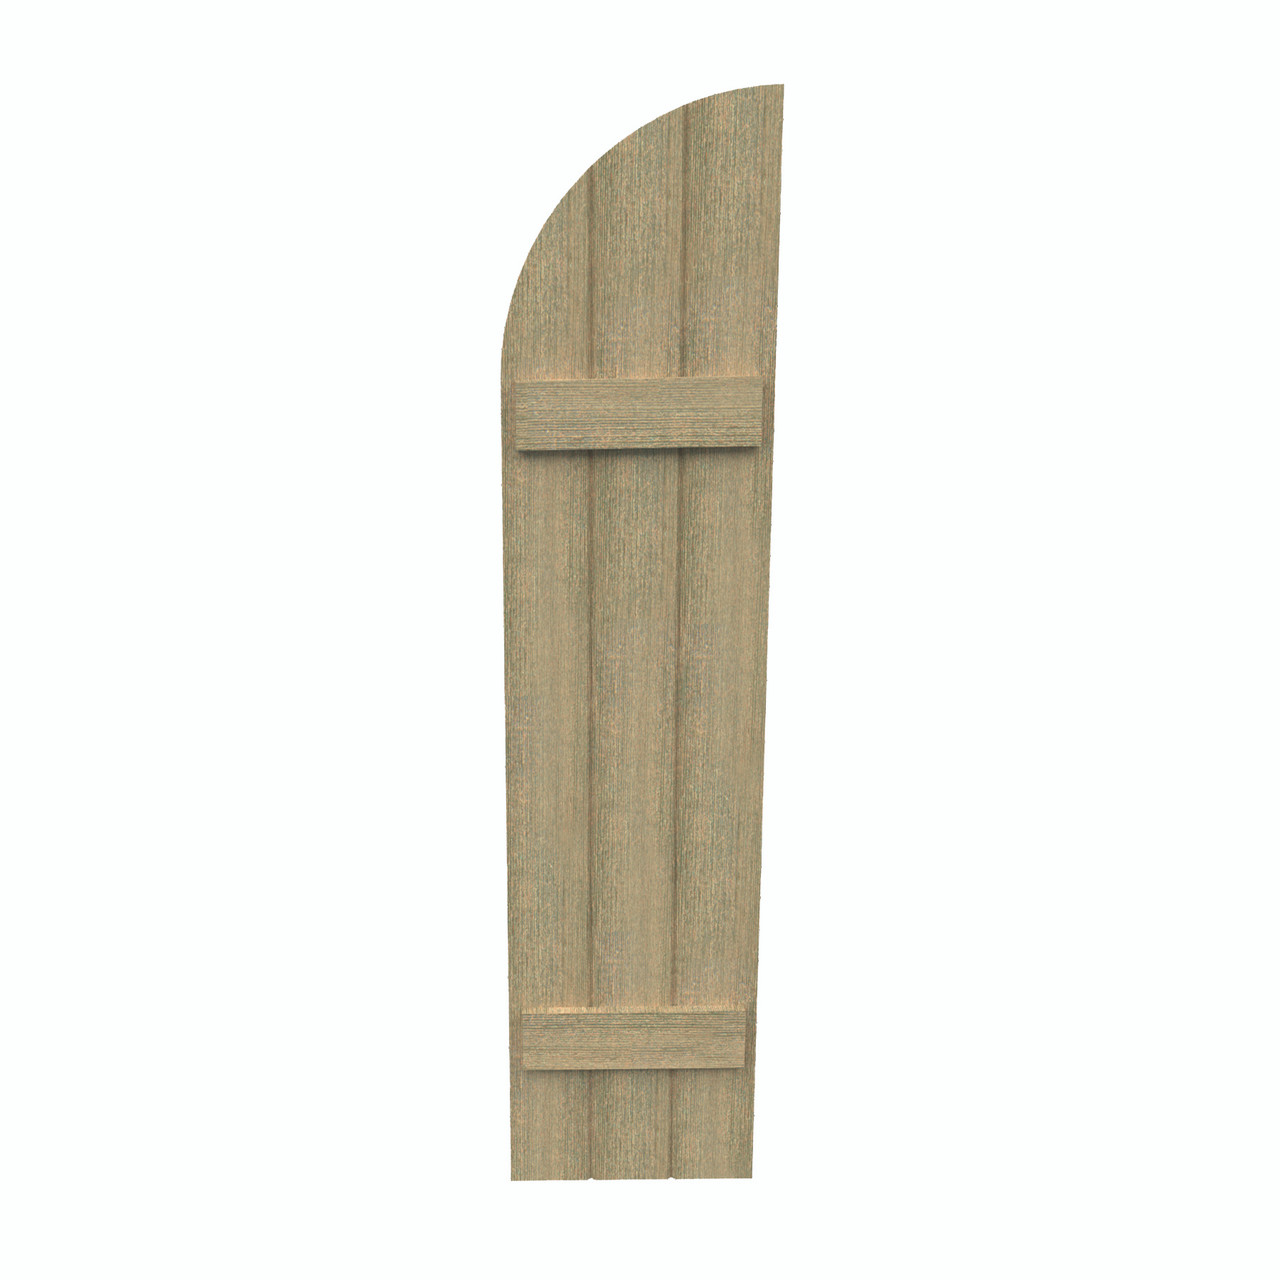 14 inch by 36 inch Quarter Round Shutter with 3-Boards